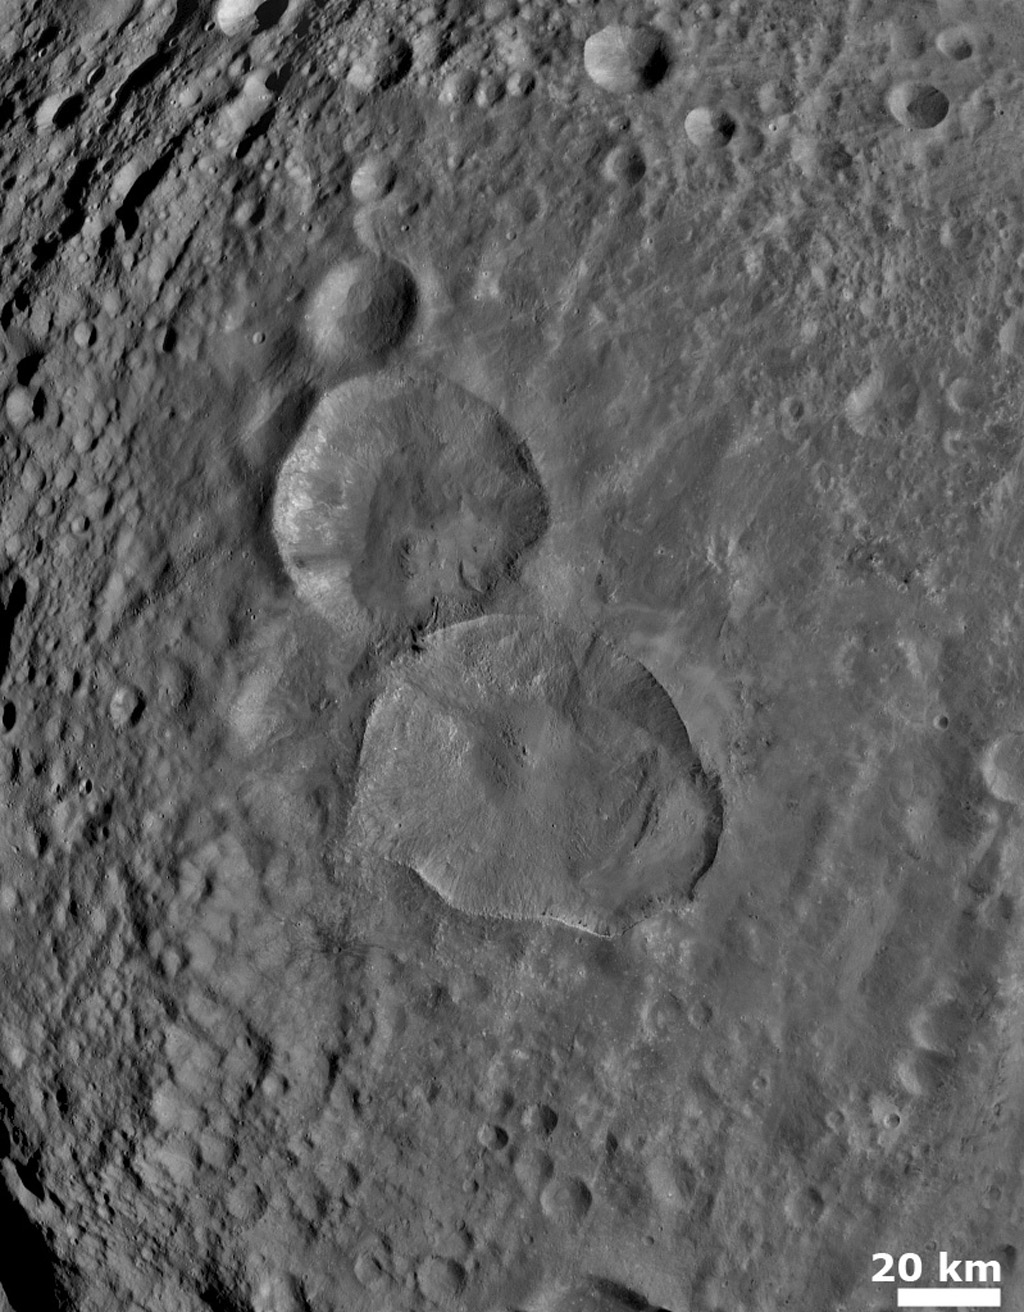 Two Large Young Craters